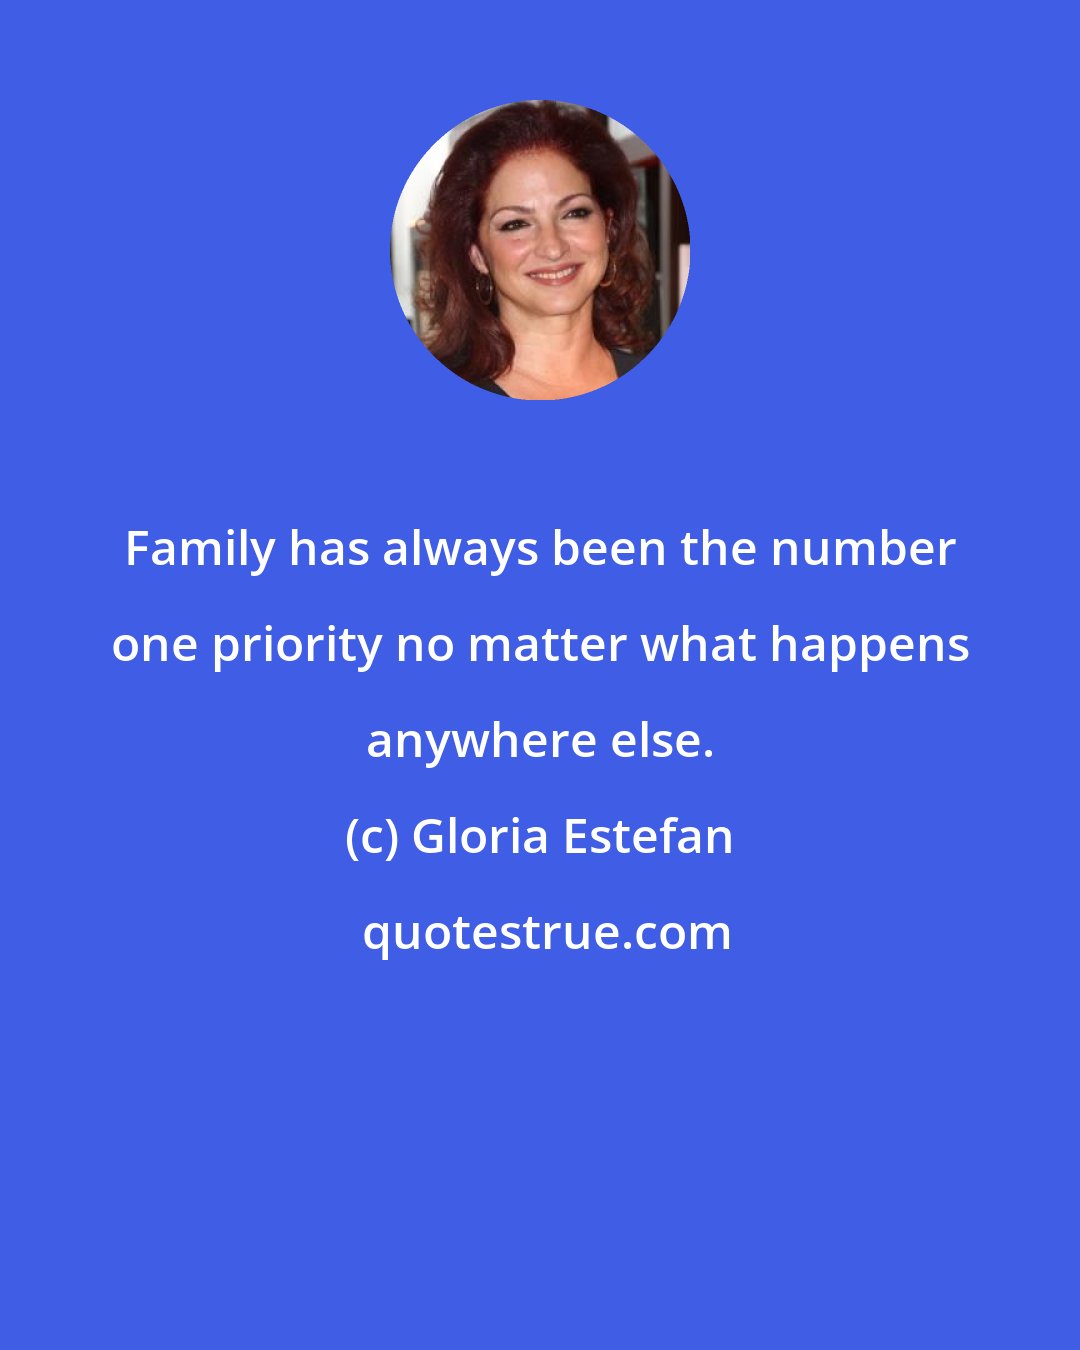 Gloria Estefan: Family has always been the number one priority no matter what happens anywhere else.